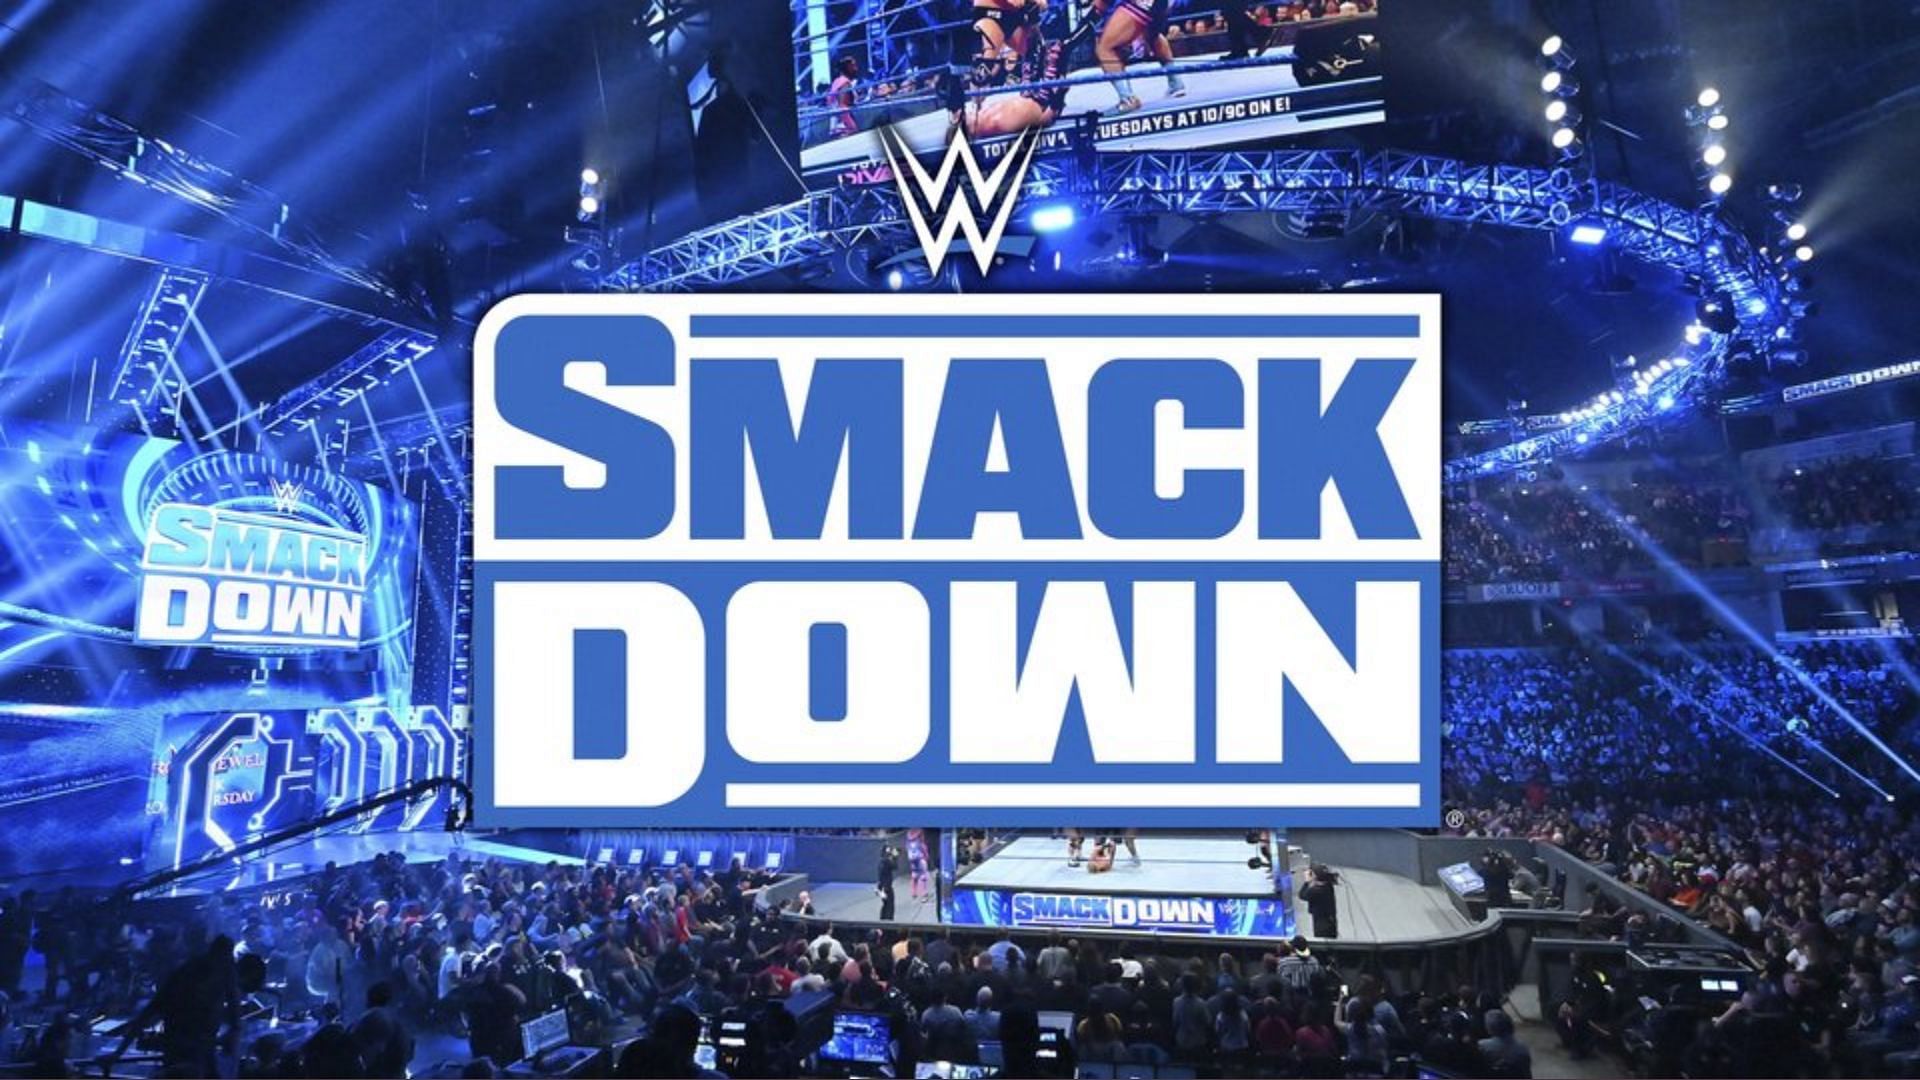 WWE SmackDown will emanate from Florida this week